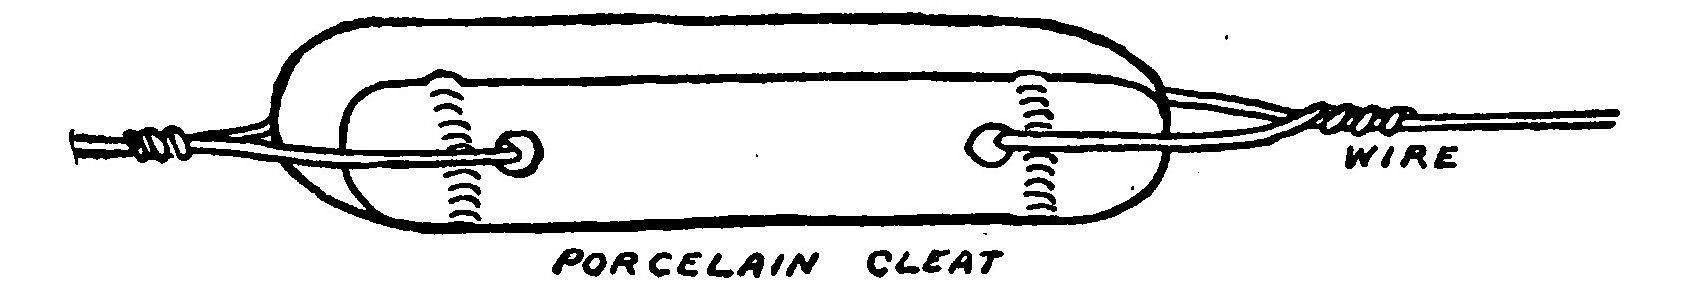 Fig. 197.—A Porcelain Cleat will make a Good Insulator for Small Aerials.